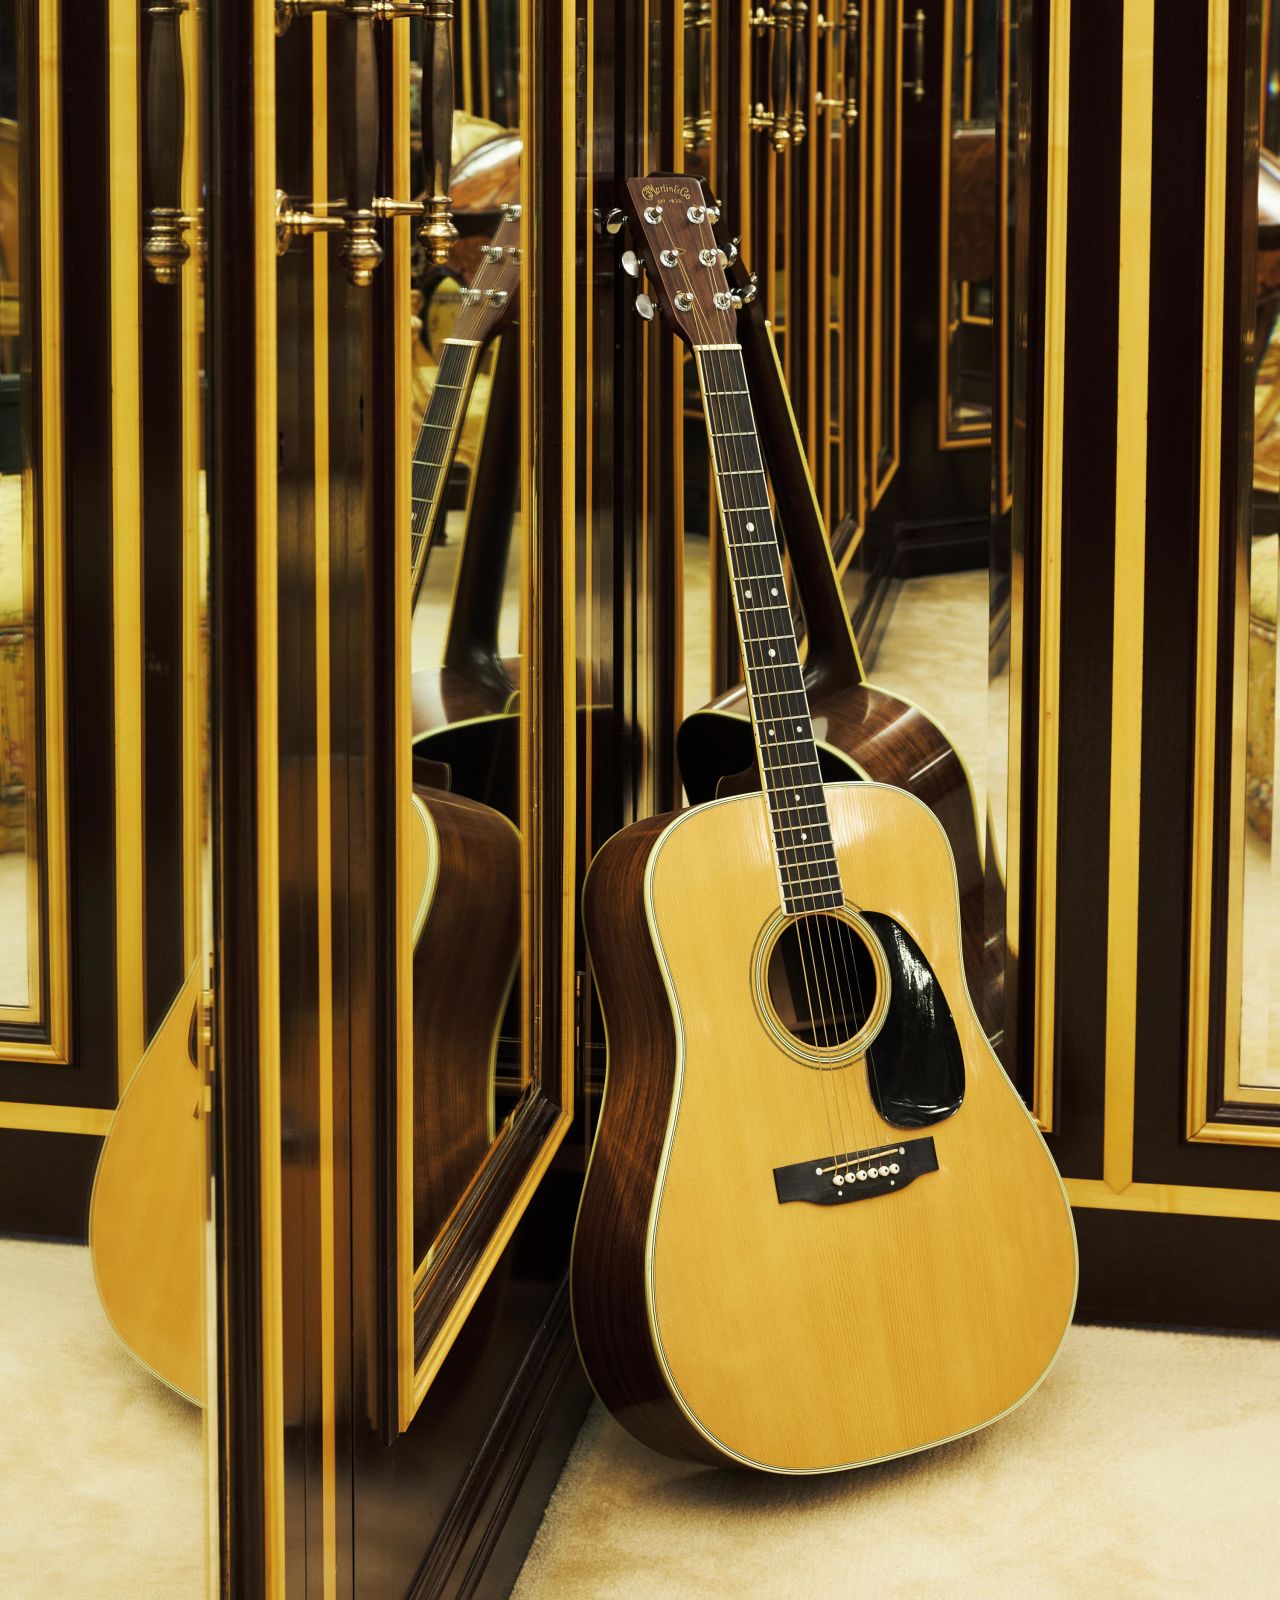 The singer's 1975 Martin D-35 Acoustic Guitar, believed to have been used to write and record "Crazy Little Thing Called Love."